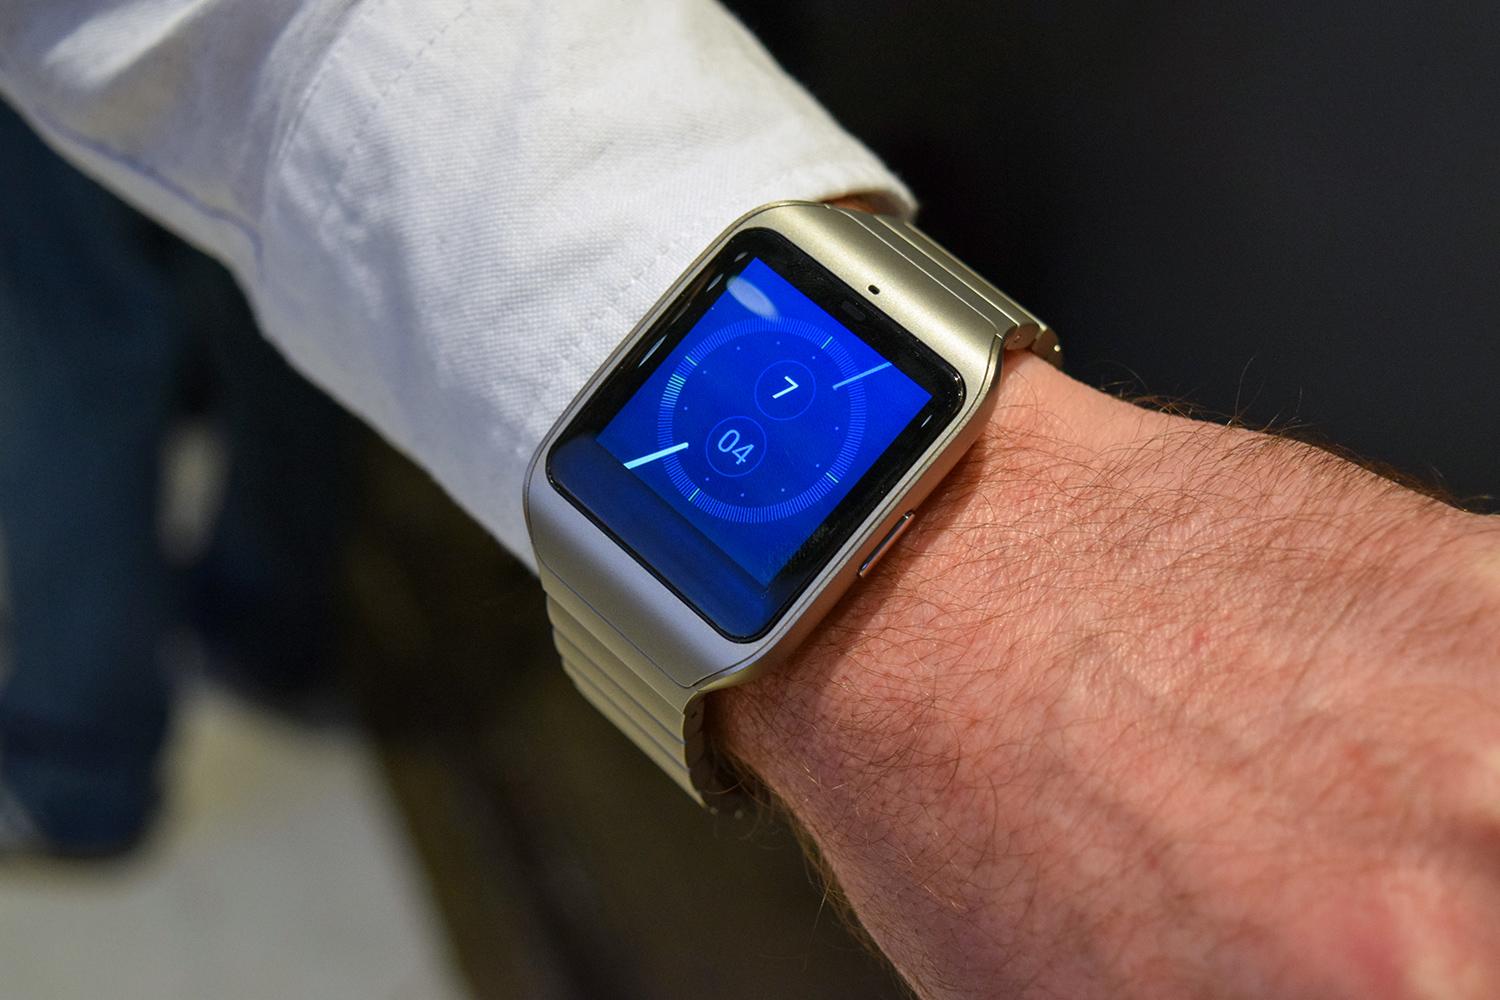 The future of wearables still looks uncertain after CES 2015